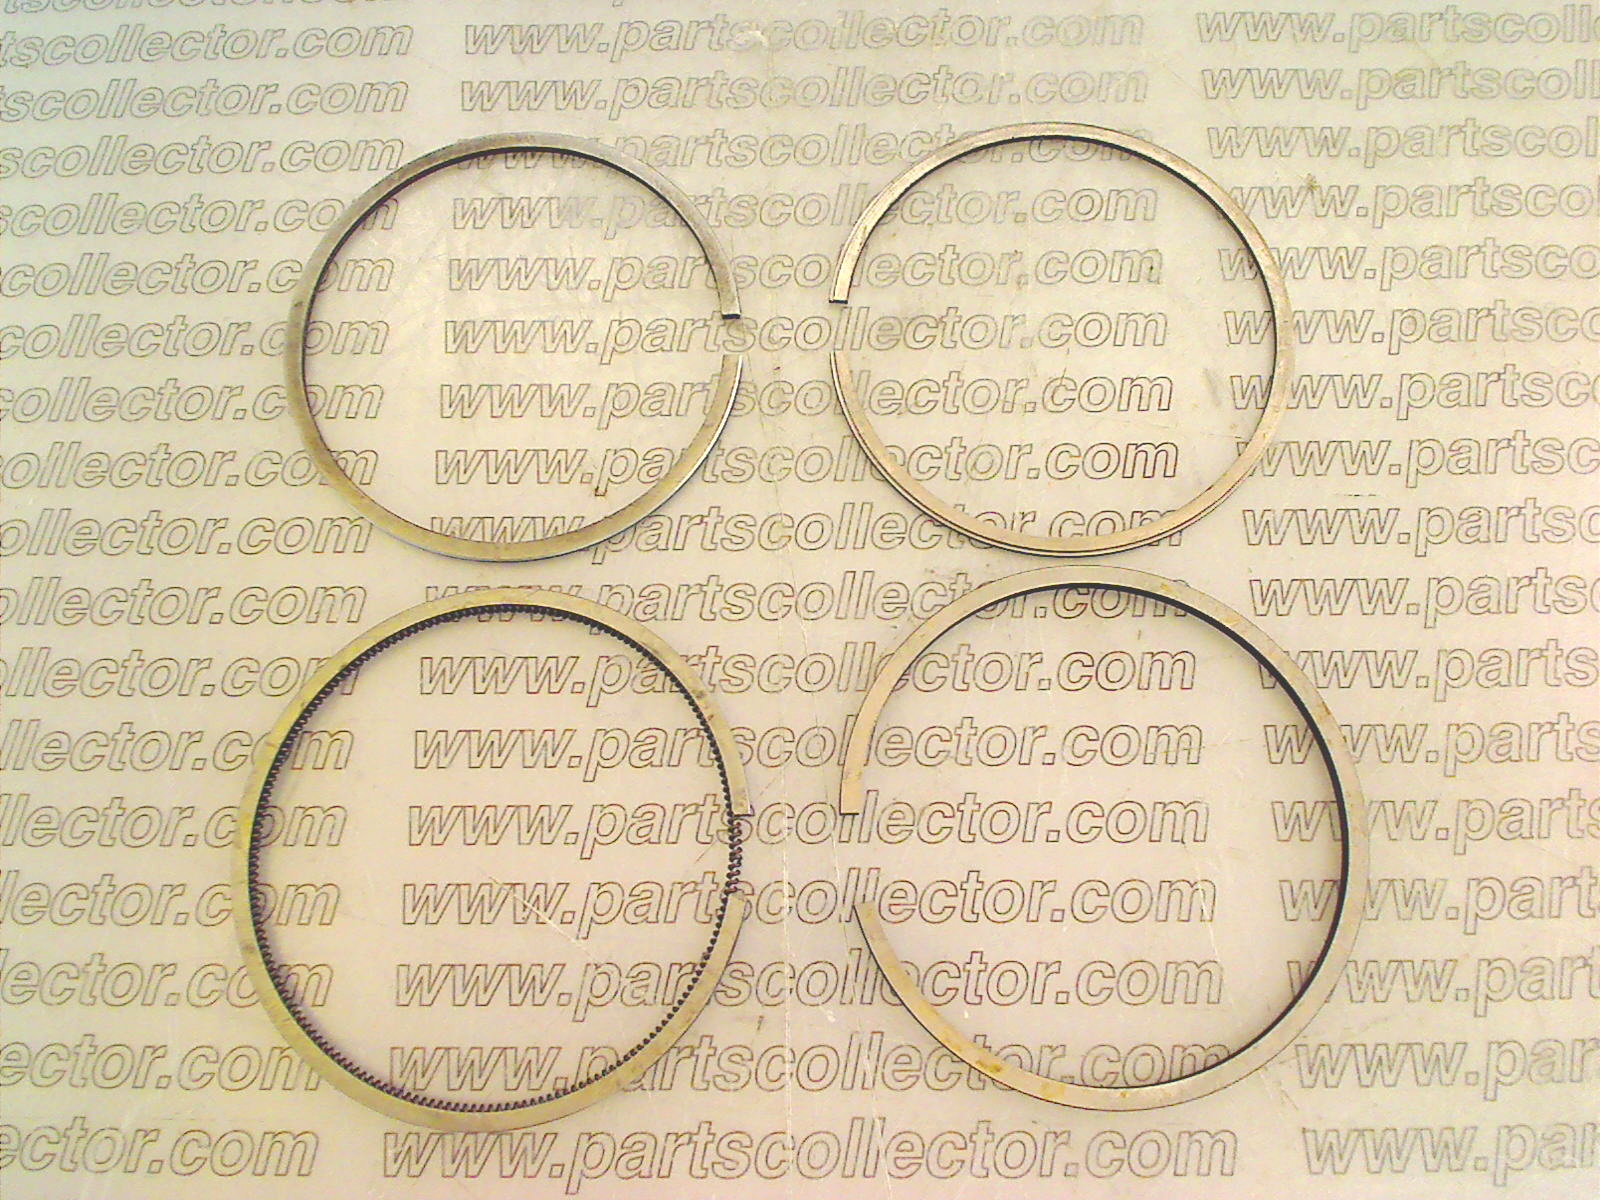 PISTON RINGS SET 6 CYLINDERS